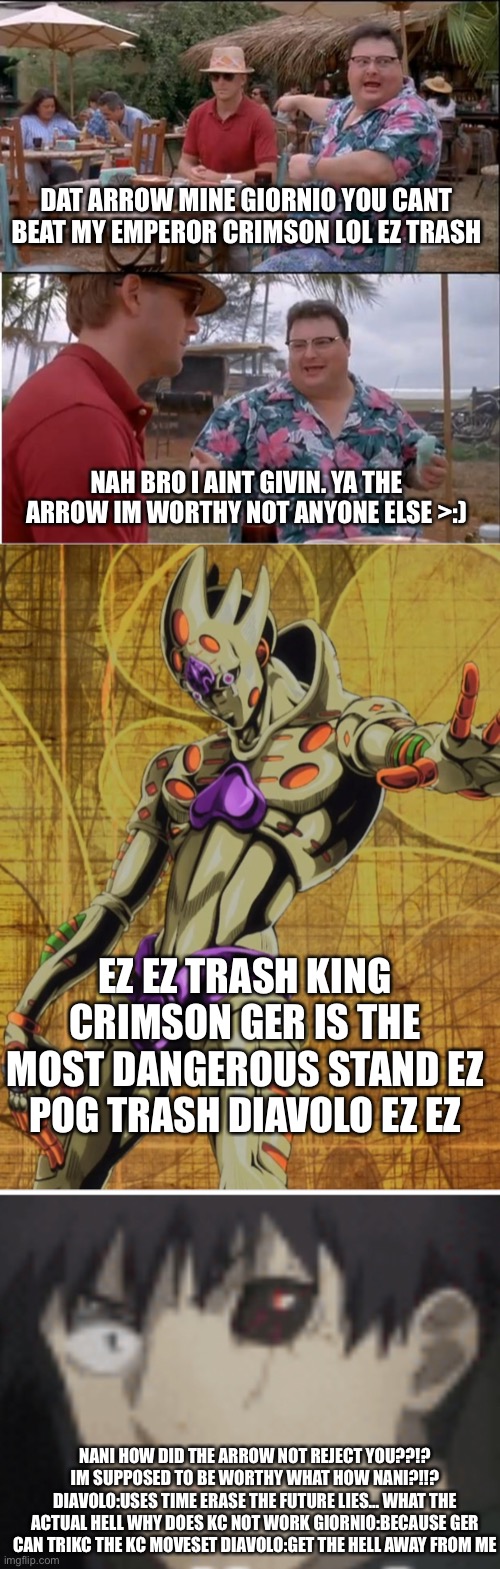 basically killing ge and getting ger in a nutshell | DAT ARROW MINE GIORNIO YOU CANT BEAT MY EMPEROR CRIMSON LOL EZ TRASH; NAH BRO I AINT GIVIN. YA THE ARROW IM WORTHY NOT ANYONE ELSE >:); EZ EZ TRASH KING CRIMSON GER IS THE MOST DANGEROUS STAND EZ POG TRASH DIAVOLO EZ EZ; NANI HOW DID THE ARROW NOT REJECT YOU??!? IM SUPPOSED TO BE WORTHY WHAT HOW NANI?!!? DIAVOLO:USES TIME ERASE THE FUTURE LIES... WHAT THE ACTUAL HELL WHY DOES KC NOT WORK GIORNIO:BECAUSE GER CAN TRIKC THE KC MOVESET DIAVOLO:GET THE HELL AWAY FROM ME | image tagged in memes,see nobody cares | made w/ Imgflip meme maker